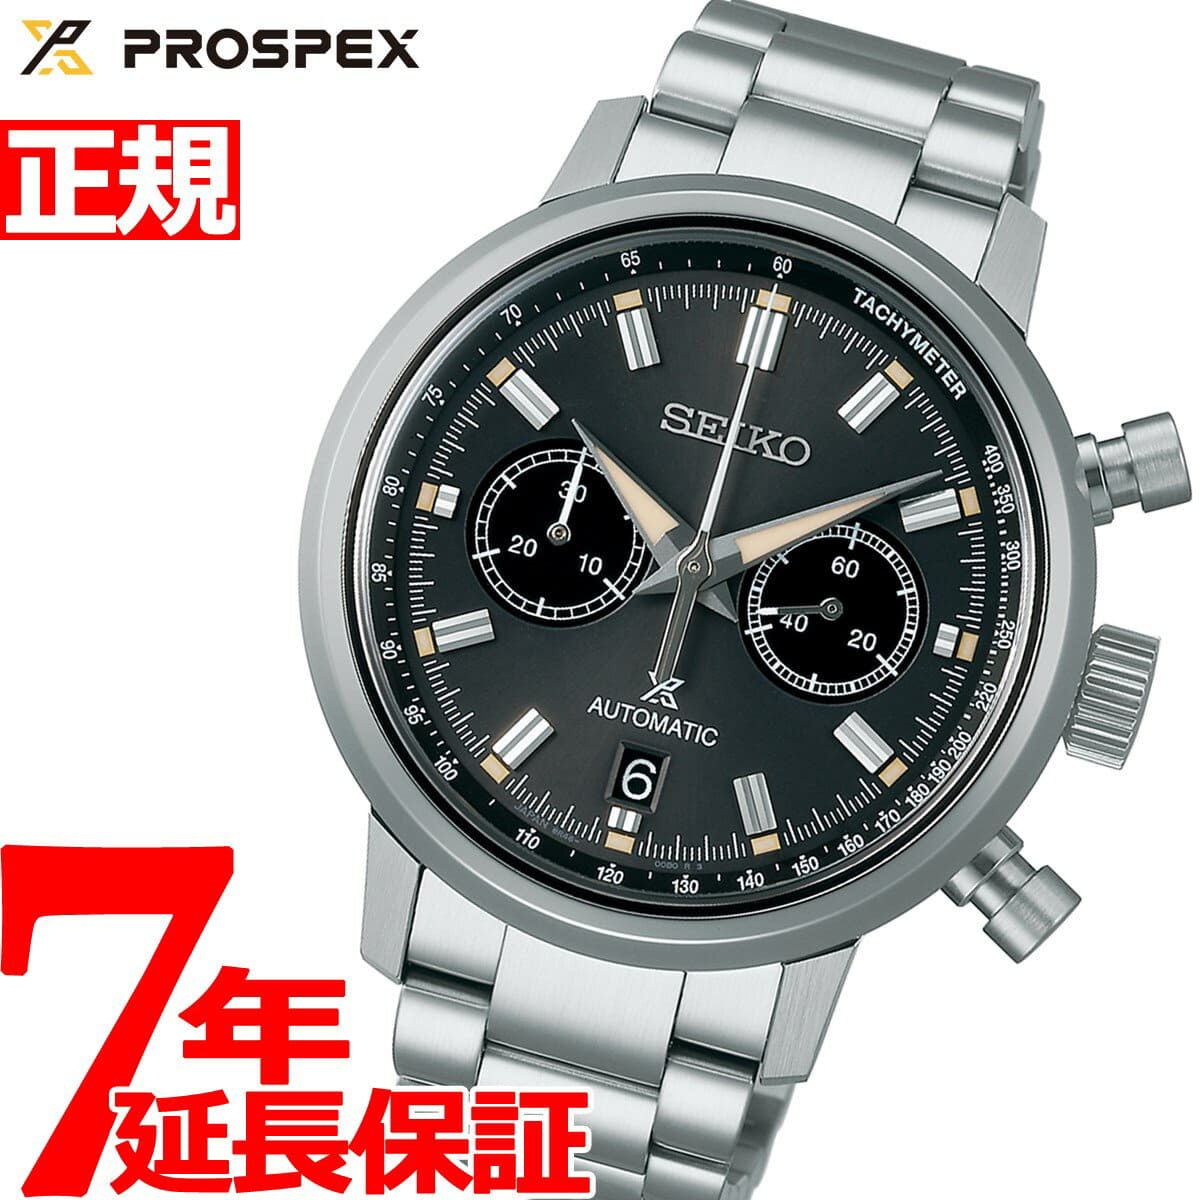 New]up to 2,000 & up to 53 times! April 23 20:00 - April 28 1:59 loan SEIKO  Pross pecks speed timer SBEC009 mens self-winding watch Chronograph model  SEIKO PROSPEX - BE FORWARD Store